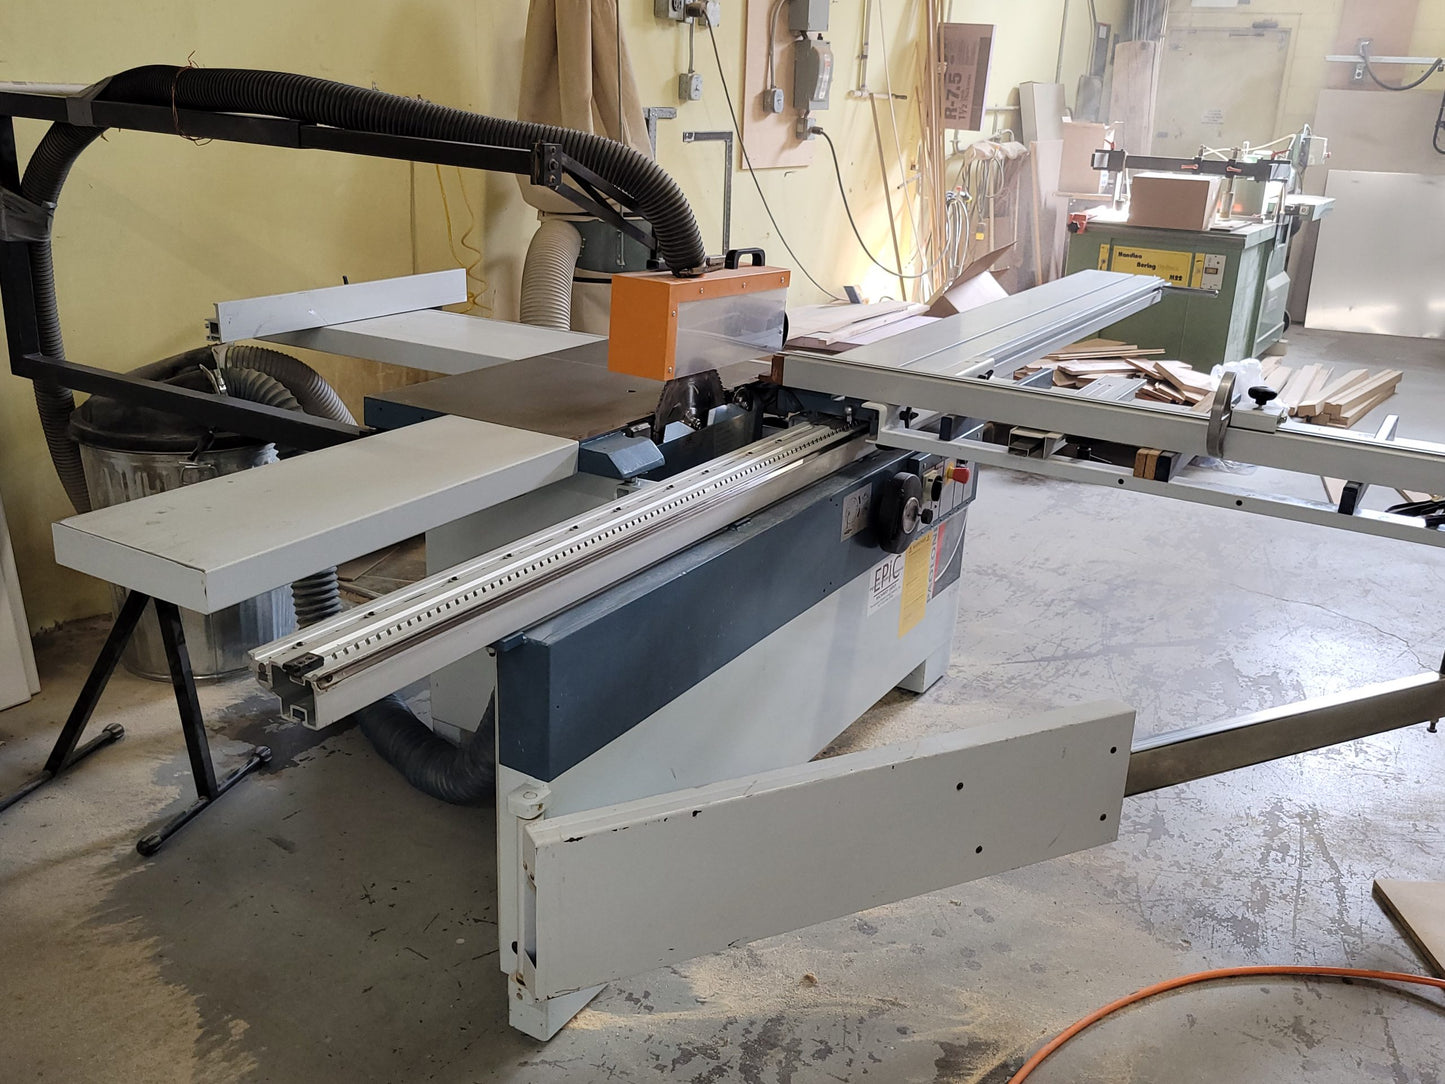 1999 Paoloni Sliding Table Saw with Delta Dust Collector